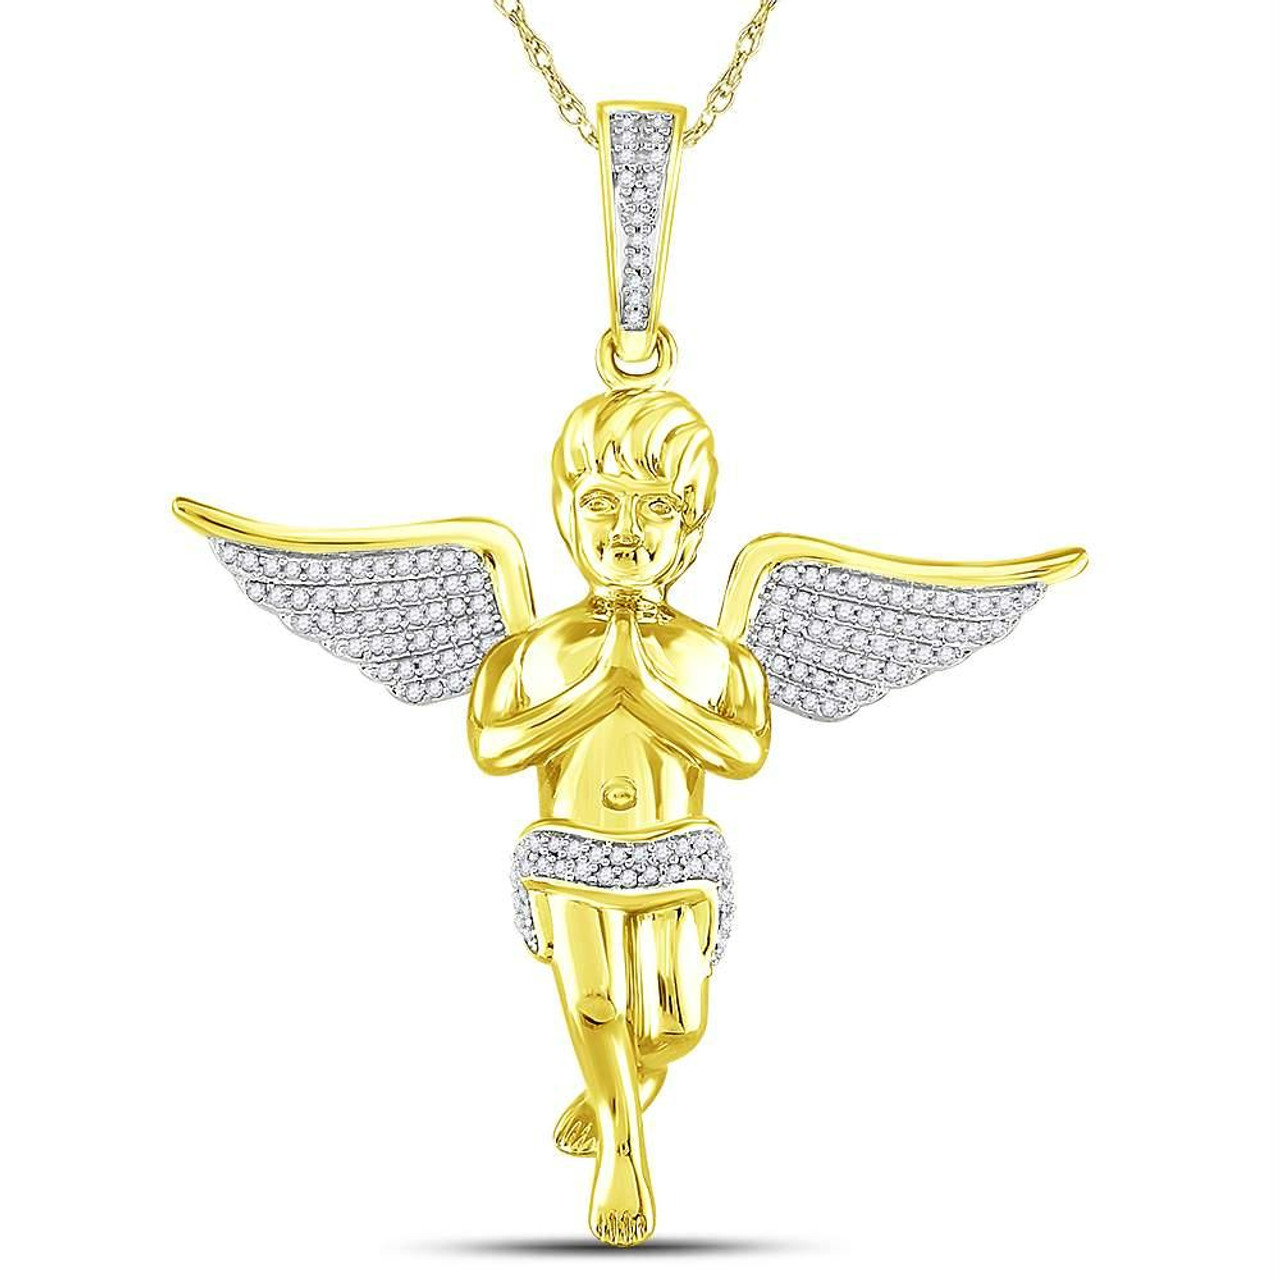 Buy Cupid Necklace, Angel Necklace, Hip Hop Necklace, Pendant Necklace,  Stainless Steel, Chain, Pendant, Necklace, Mens Necklace, Cuban Link Online  in India - Etsy